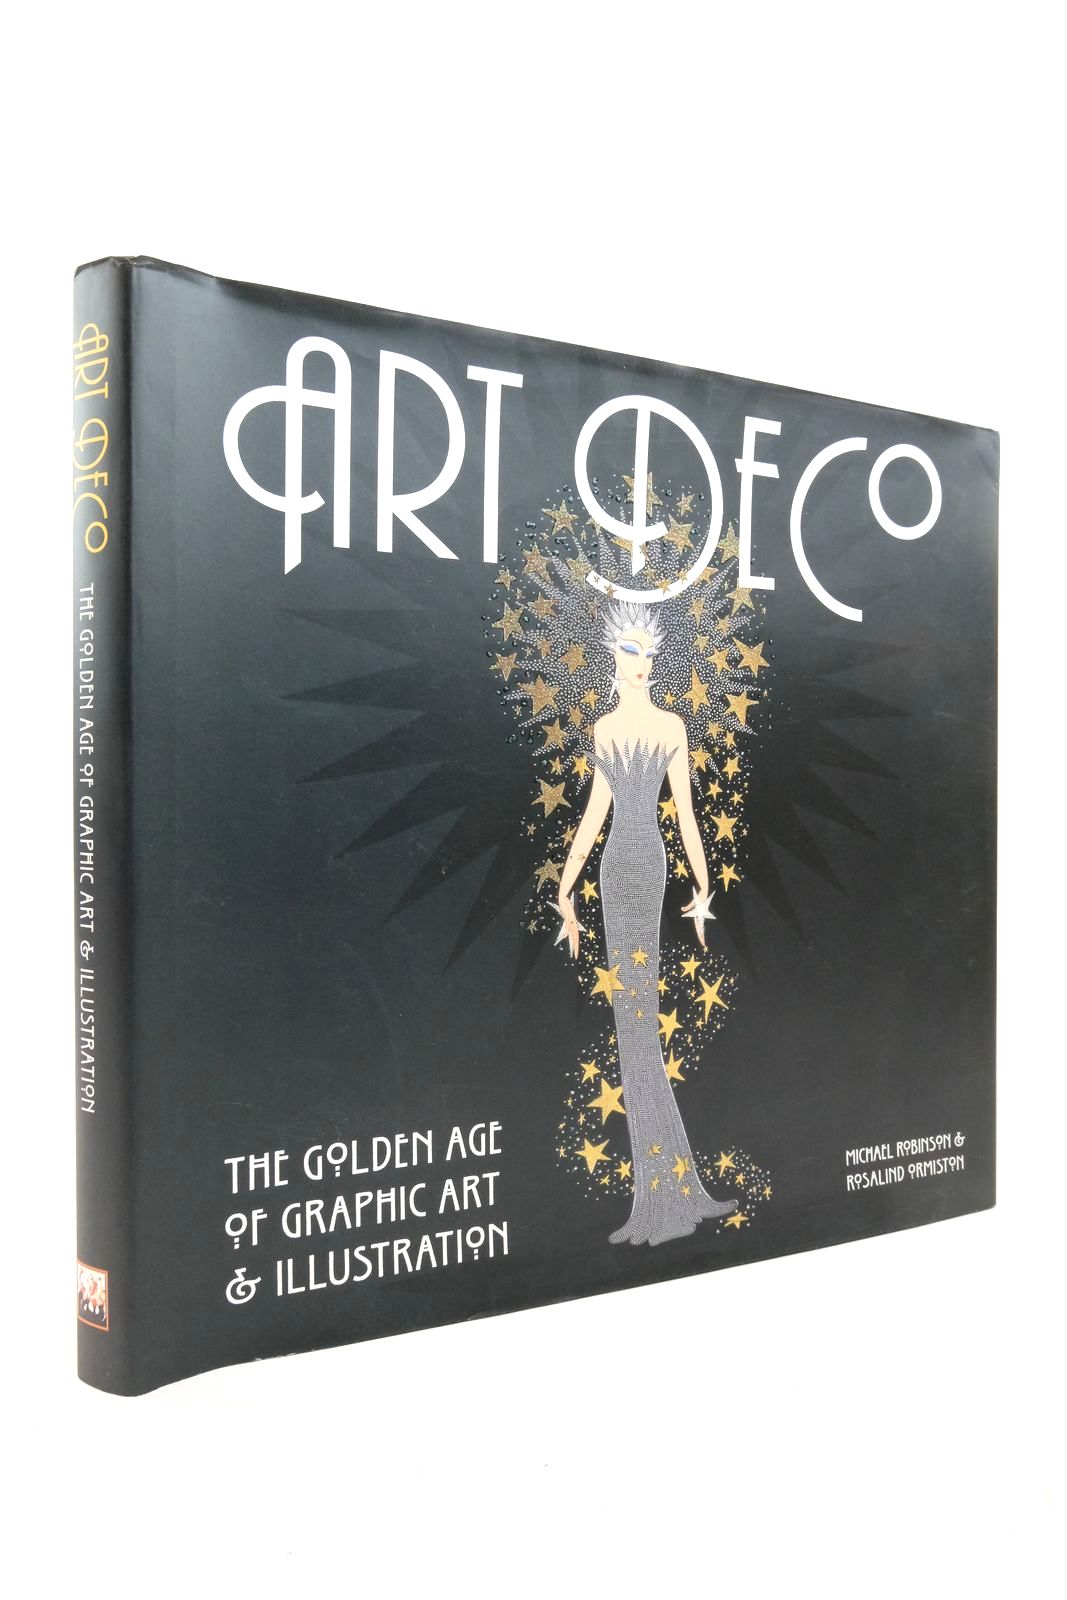 Photo of ART DECO THE GOLDEN AGE OF GRAPHIC ART & ILLUSTRATION- Stock Number: 2137712